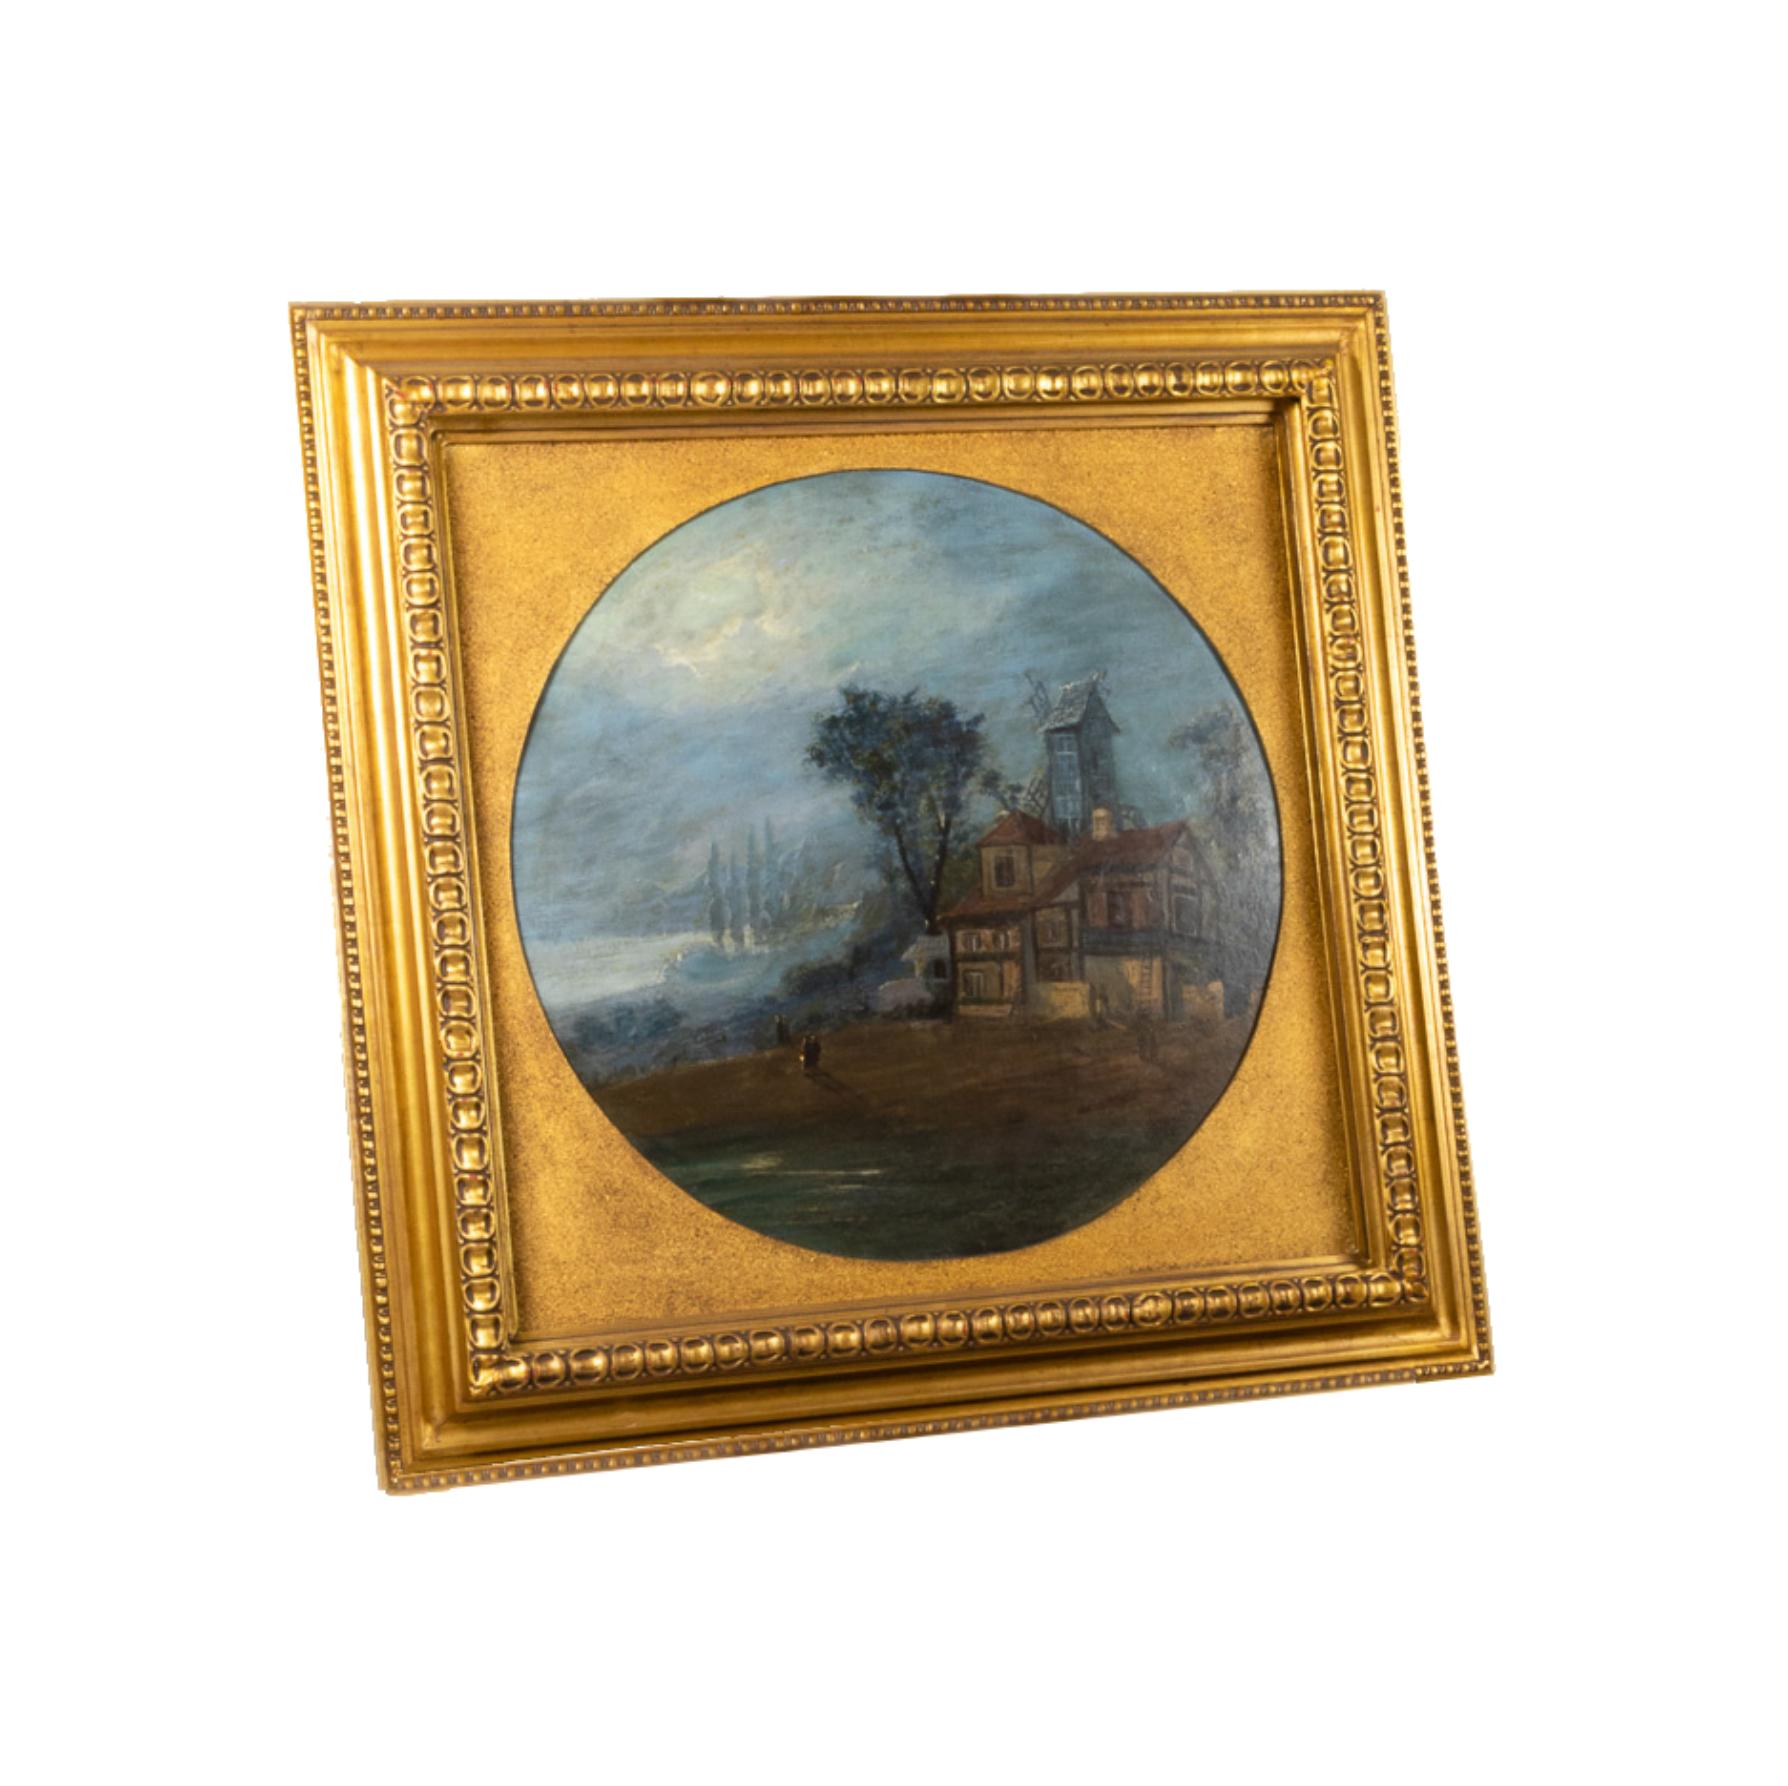 An uncommon round oil on wood painting depicting a Brittany nocturne landscape, featuring a mill and two couples walking around in the dark with lanterns.
Frame 84.5 x 84 cm 
Diameter painting 58 cm